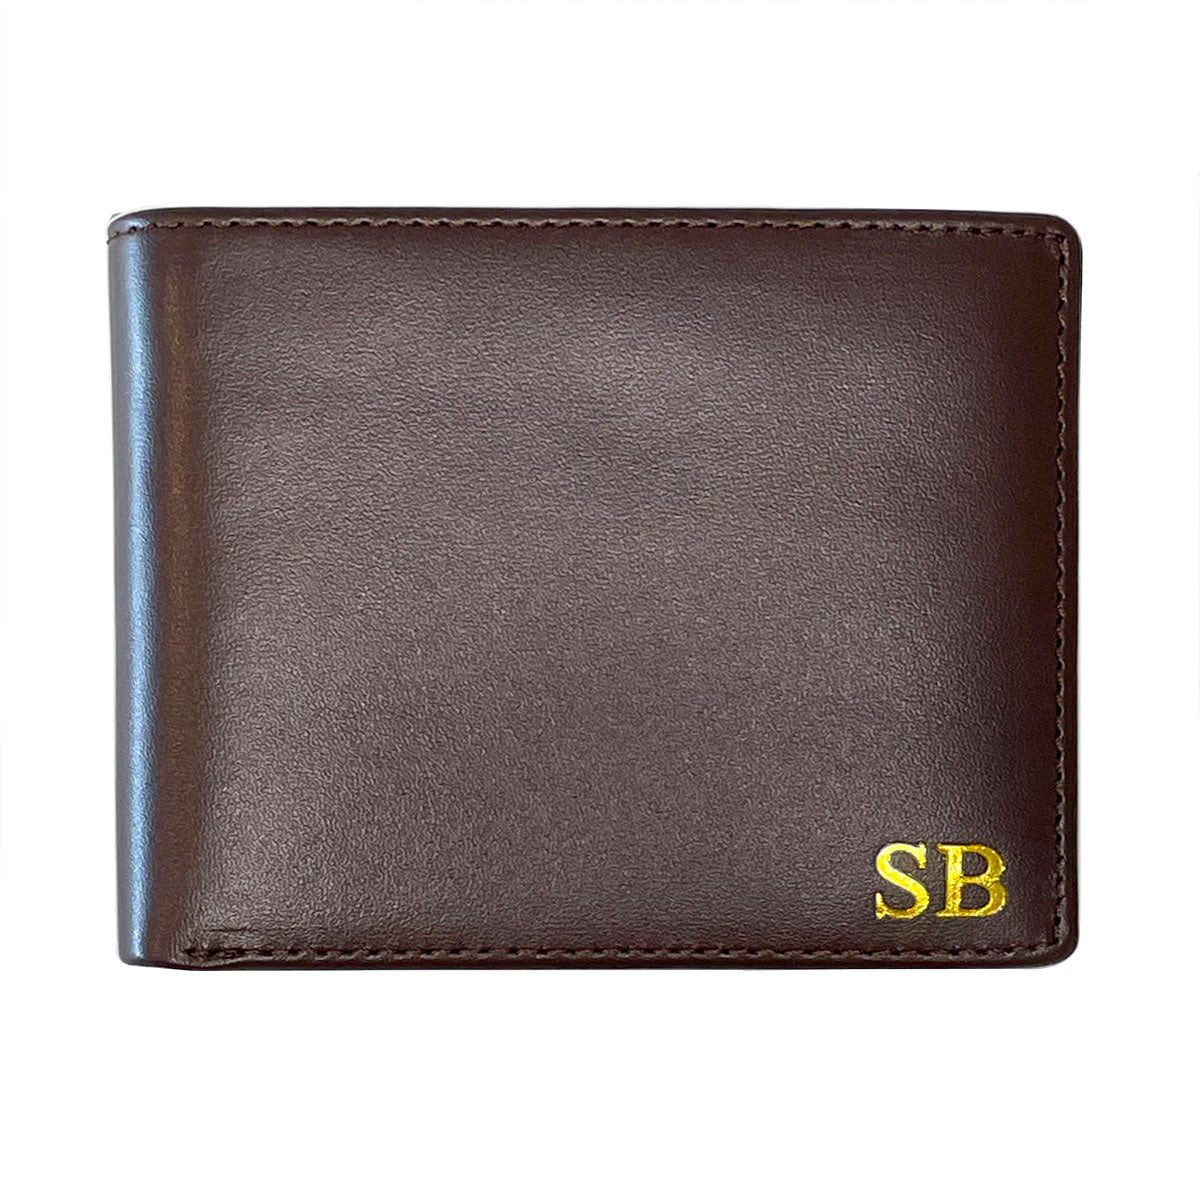 Genuine leather wallet with zipper